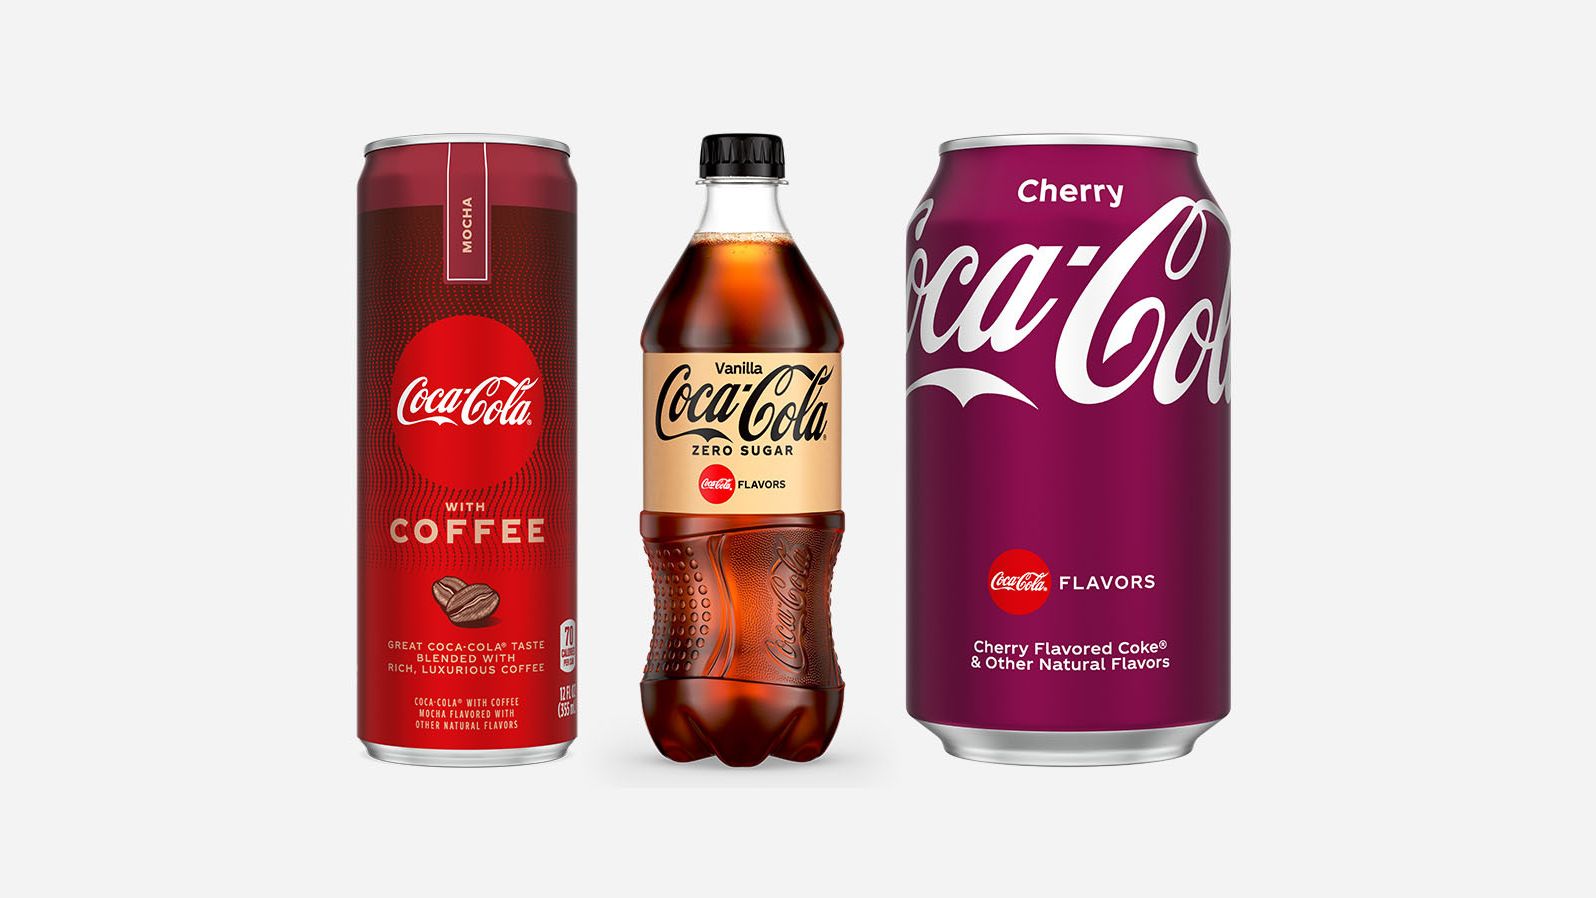 Coke is giving its cans a makeover